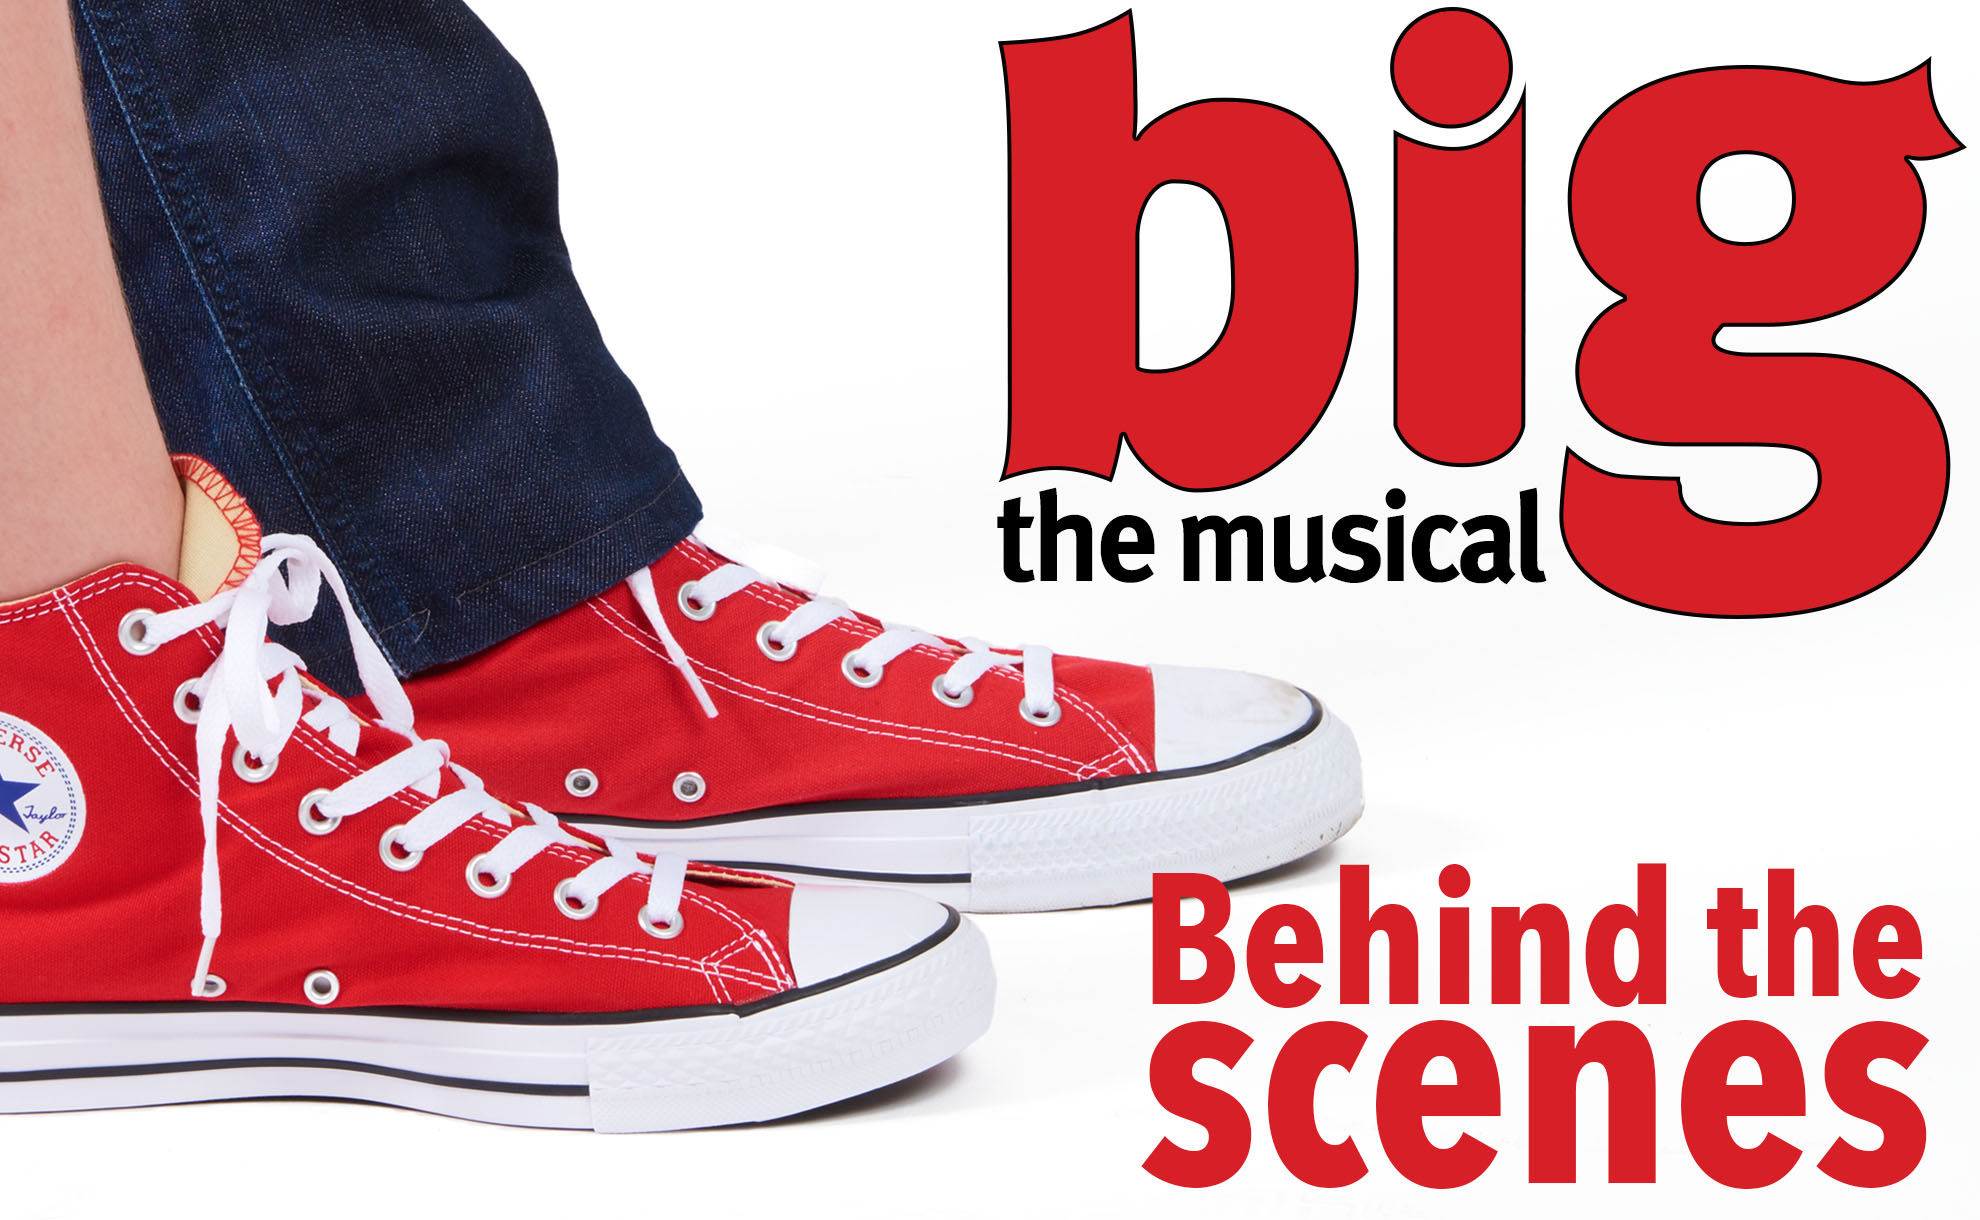 Big, The Musical at the Footlight Club